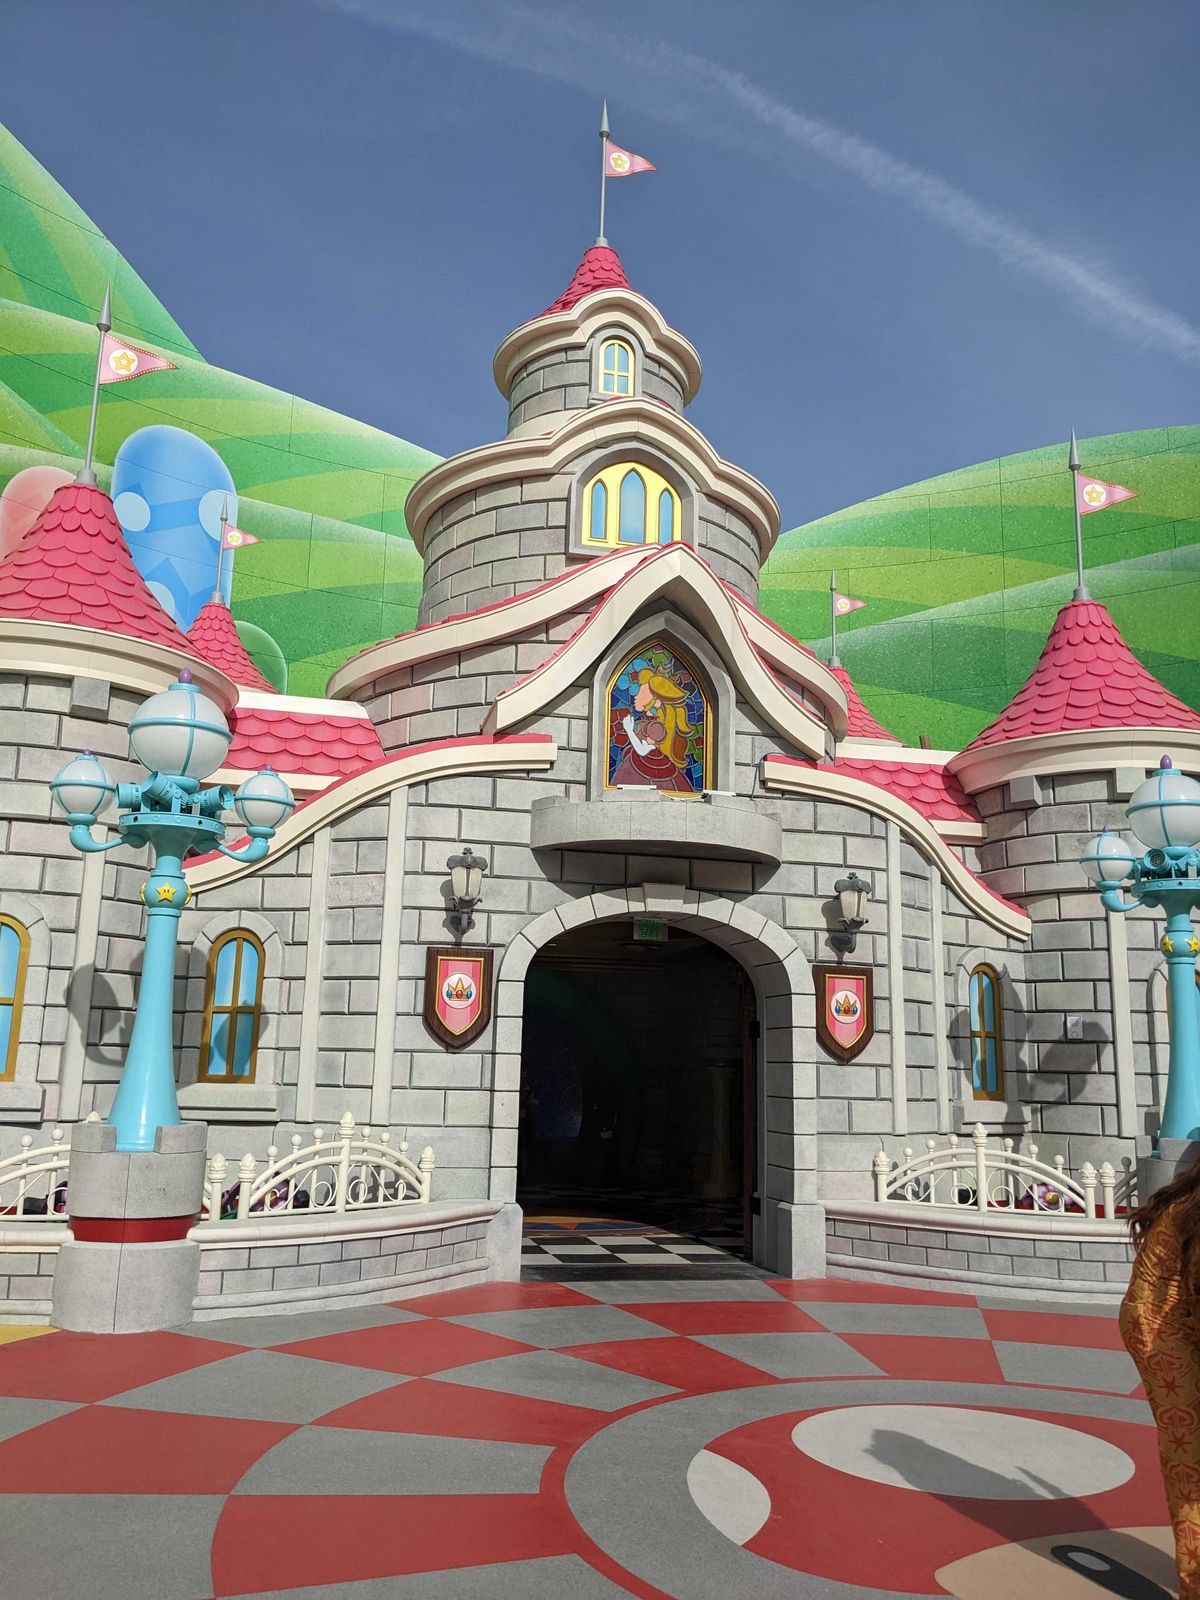 Princess Peach’s castle in Super Nintendo World. The castle is grey, has multiple stories, pink roofing, a stained glass image of a Princess Peach, and a flag on top.